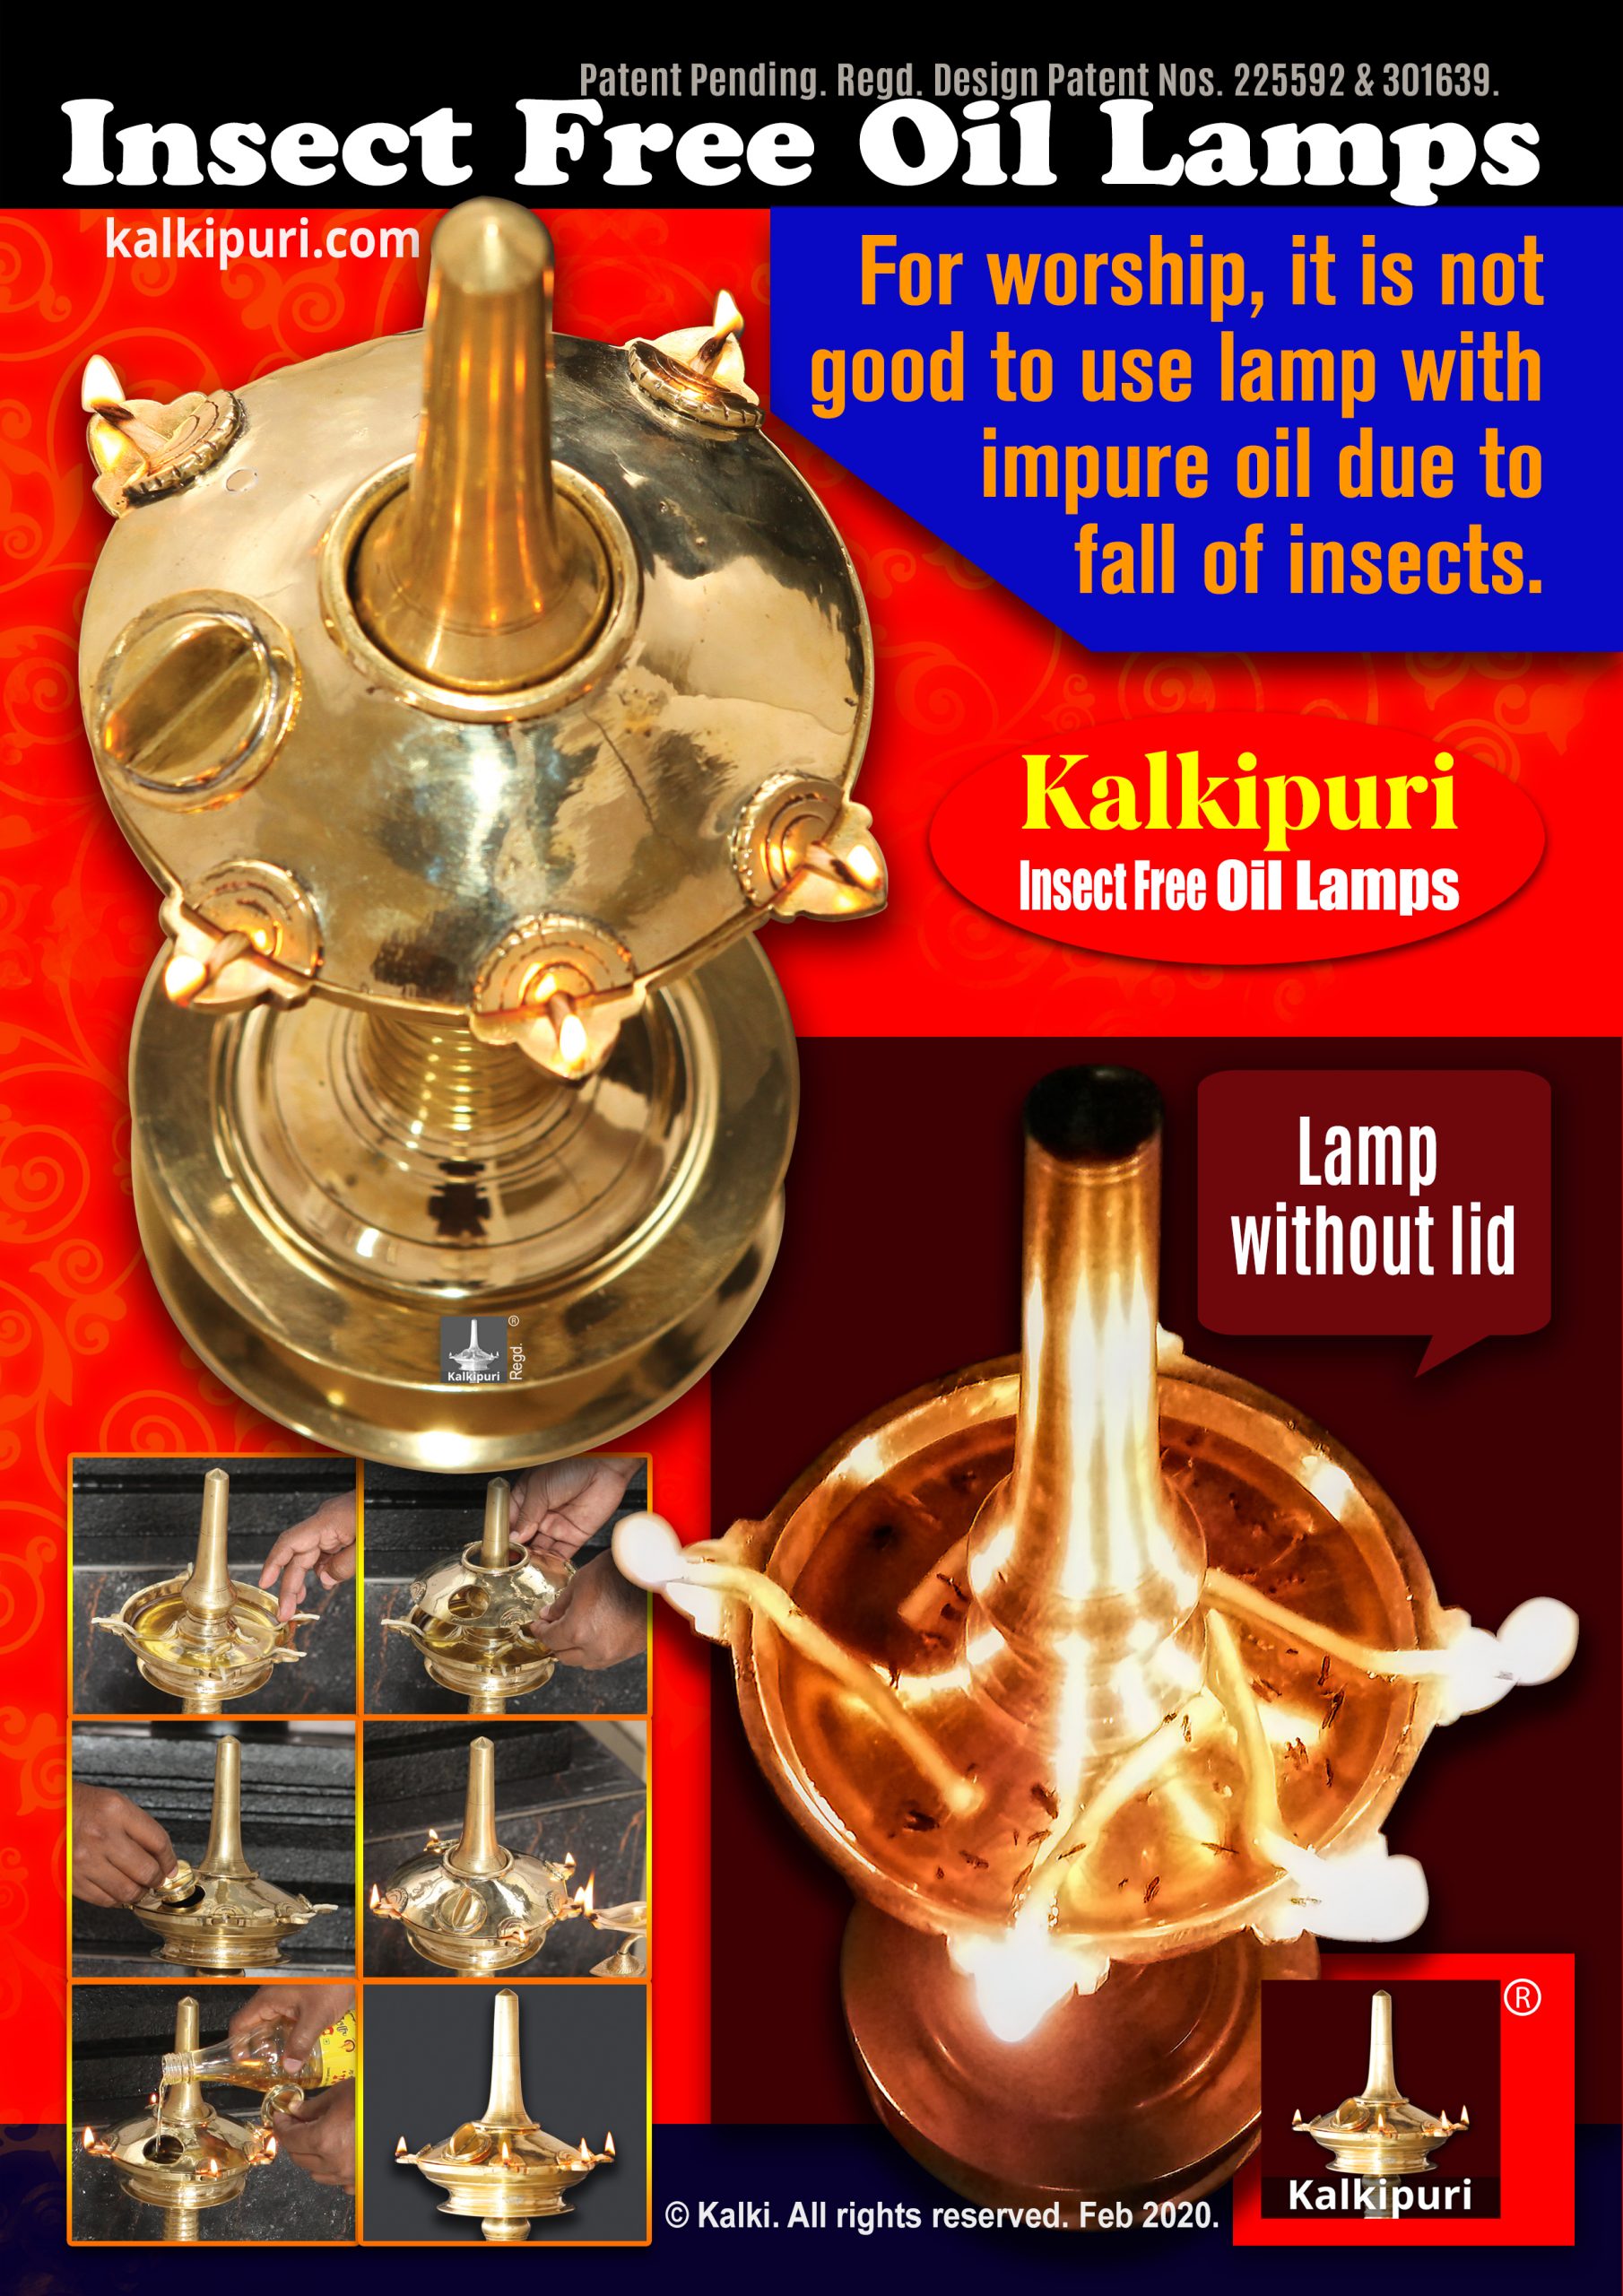 Kalkipuri Insect Free Oil Lamps and lamp without lid 1